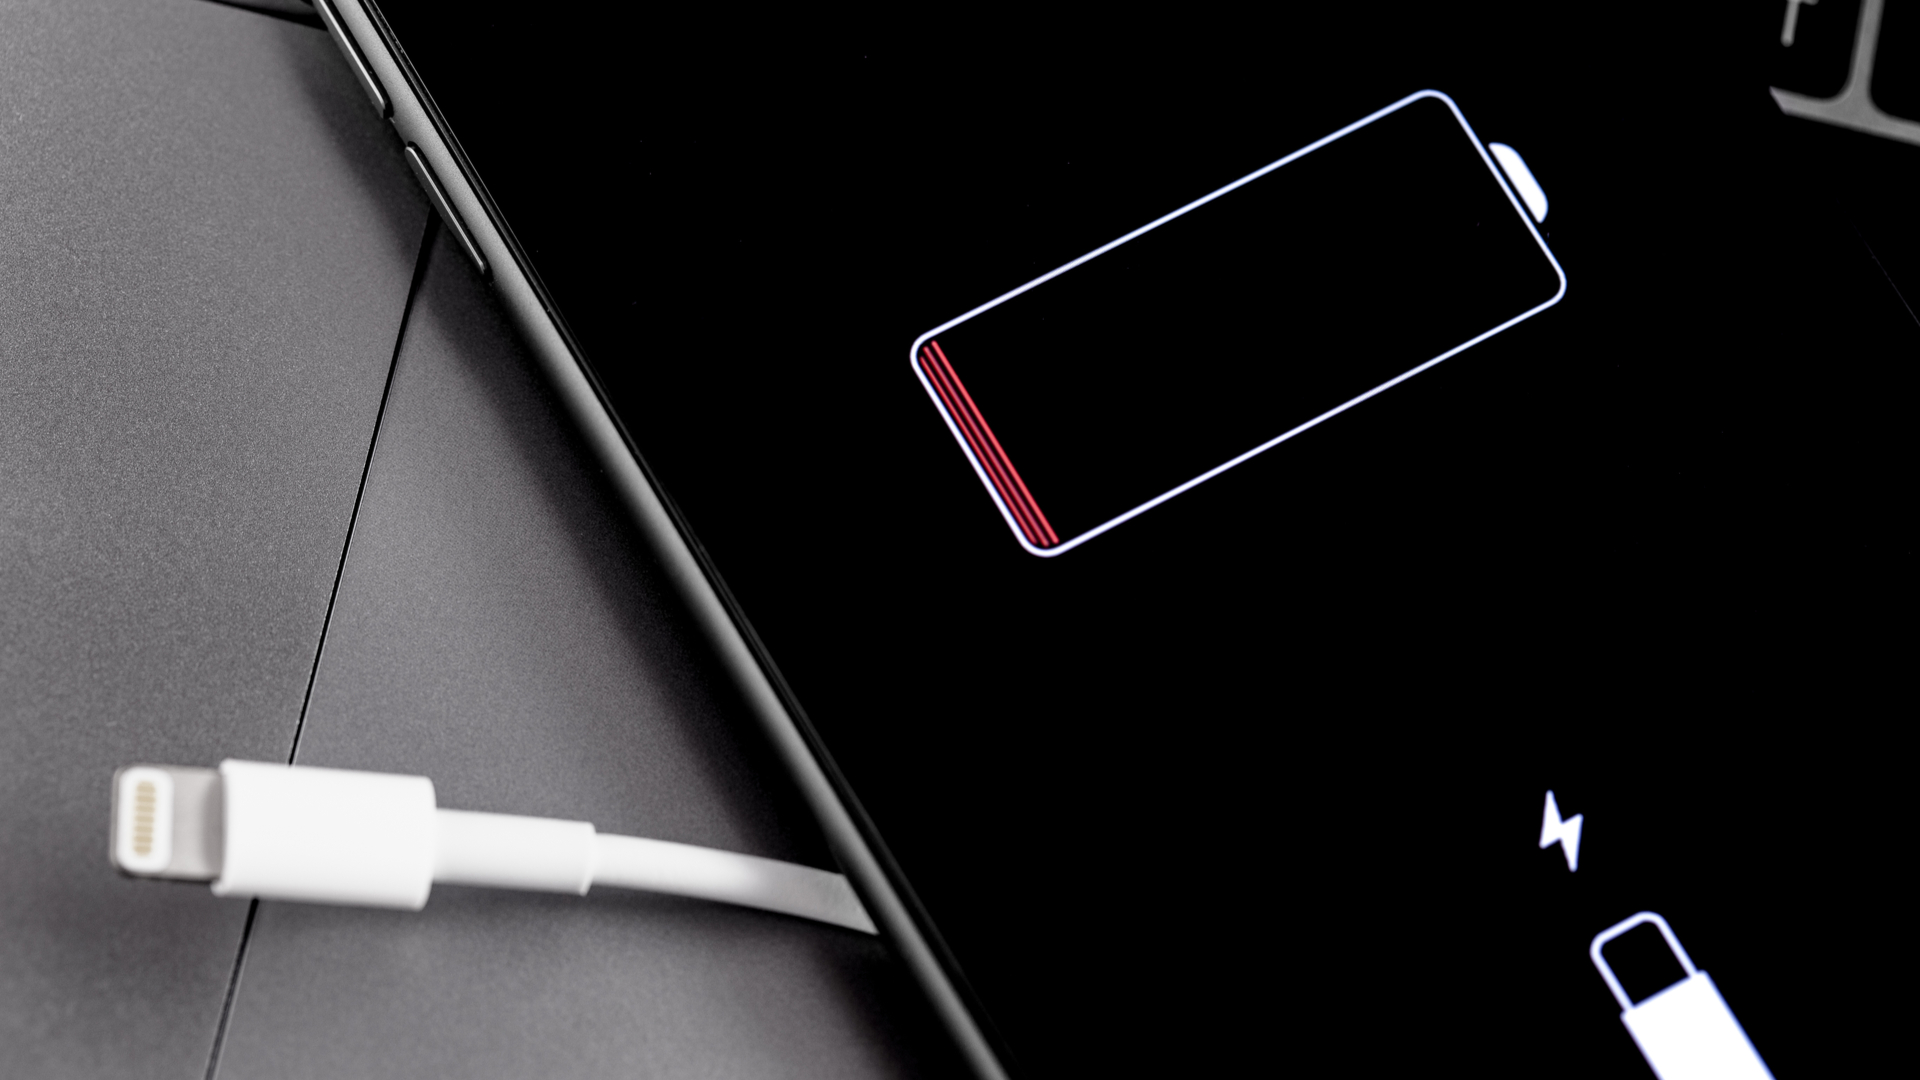 This hidden iPhone feature could keep you from running out of battery — here’s how